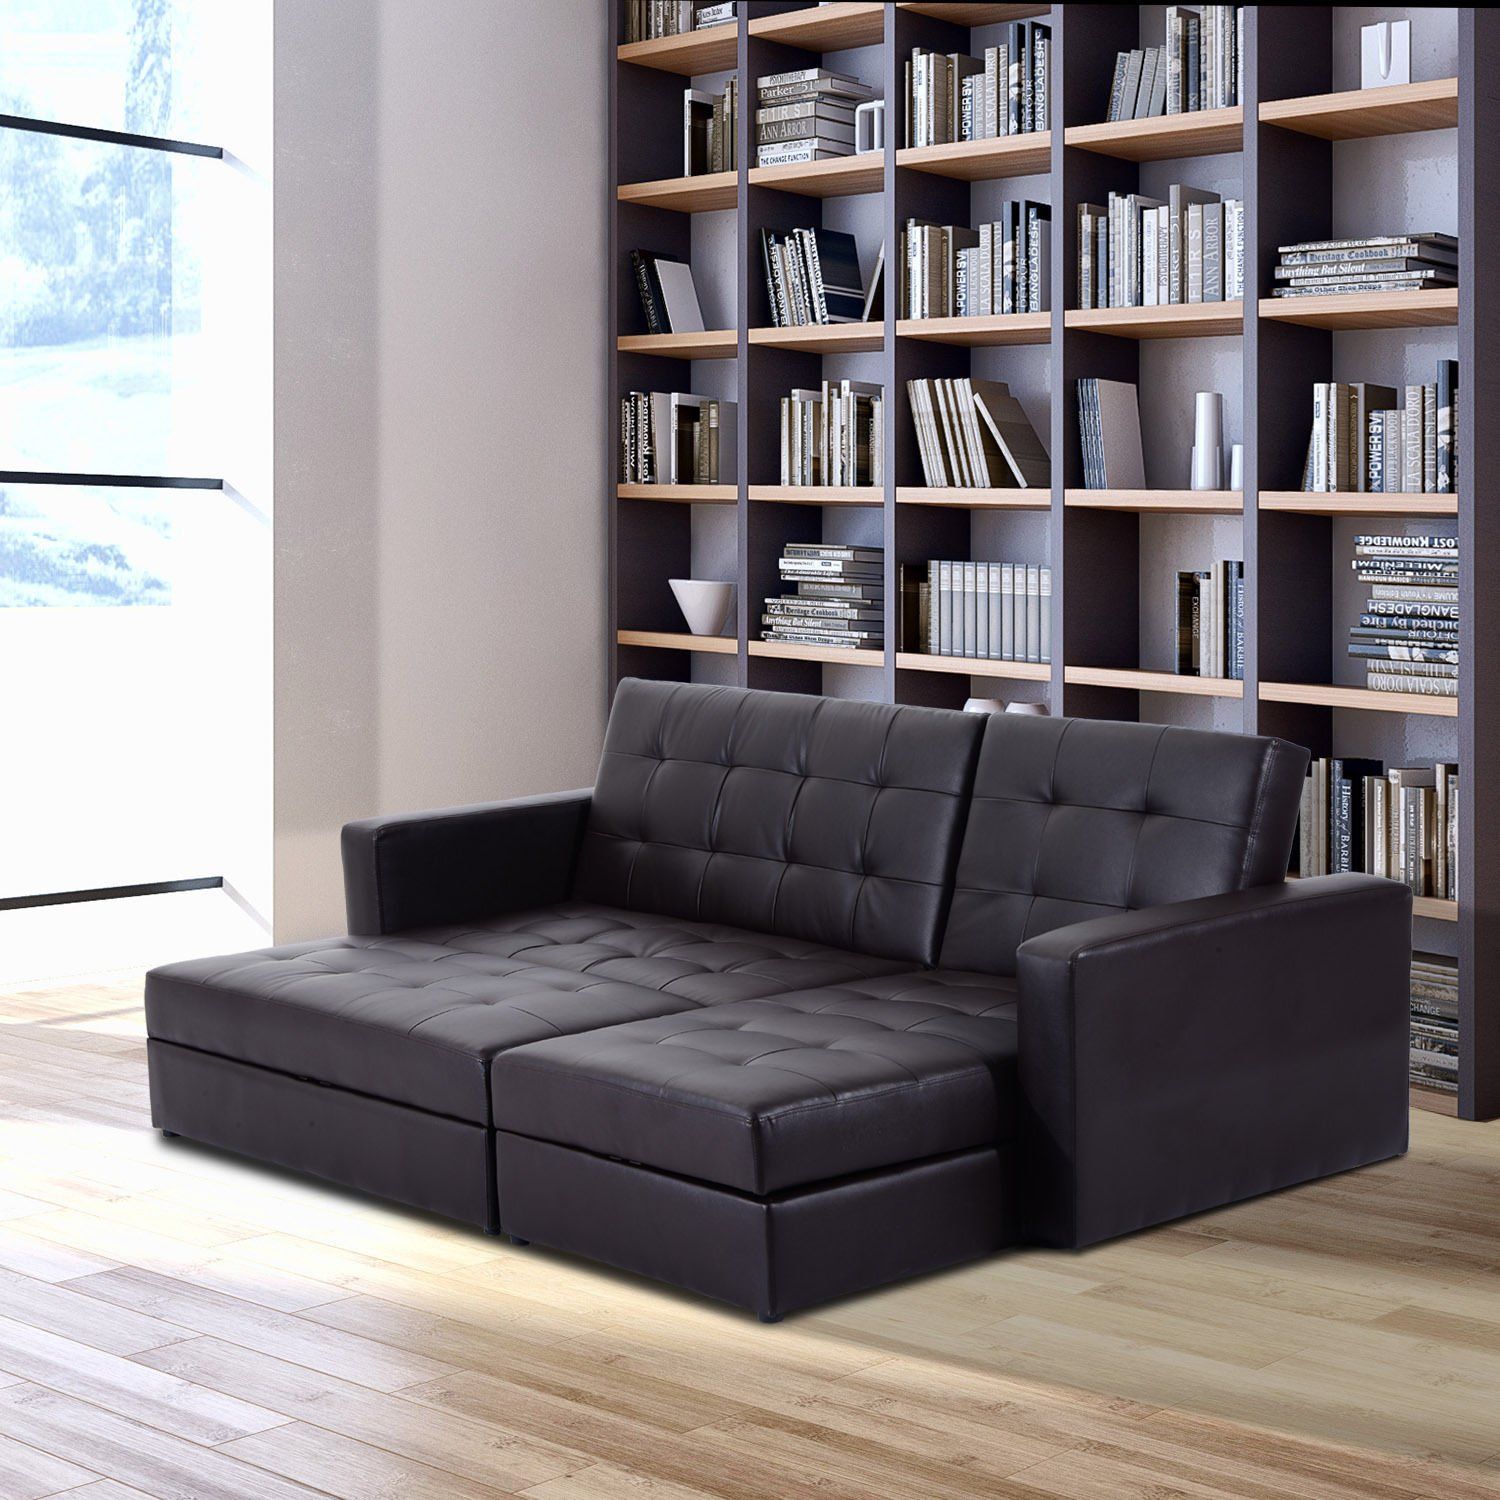 Storage+sleeper+couch+sofa+bed – Simply Style Inside Prato Storage Sectional Futon Sofas (Photo 11 of 15)